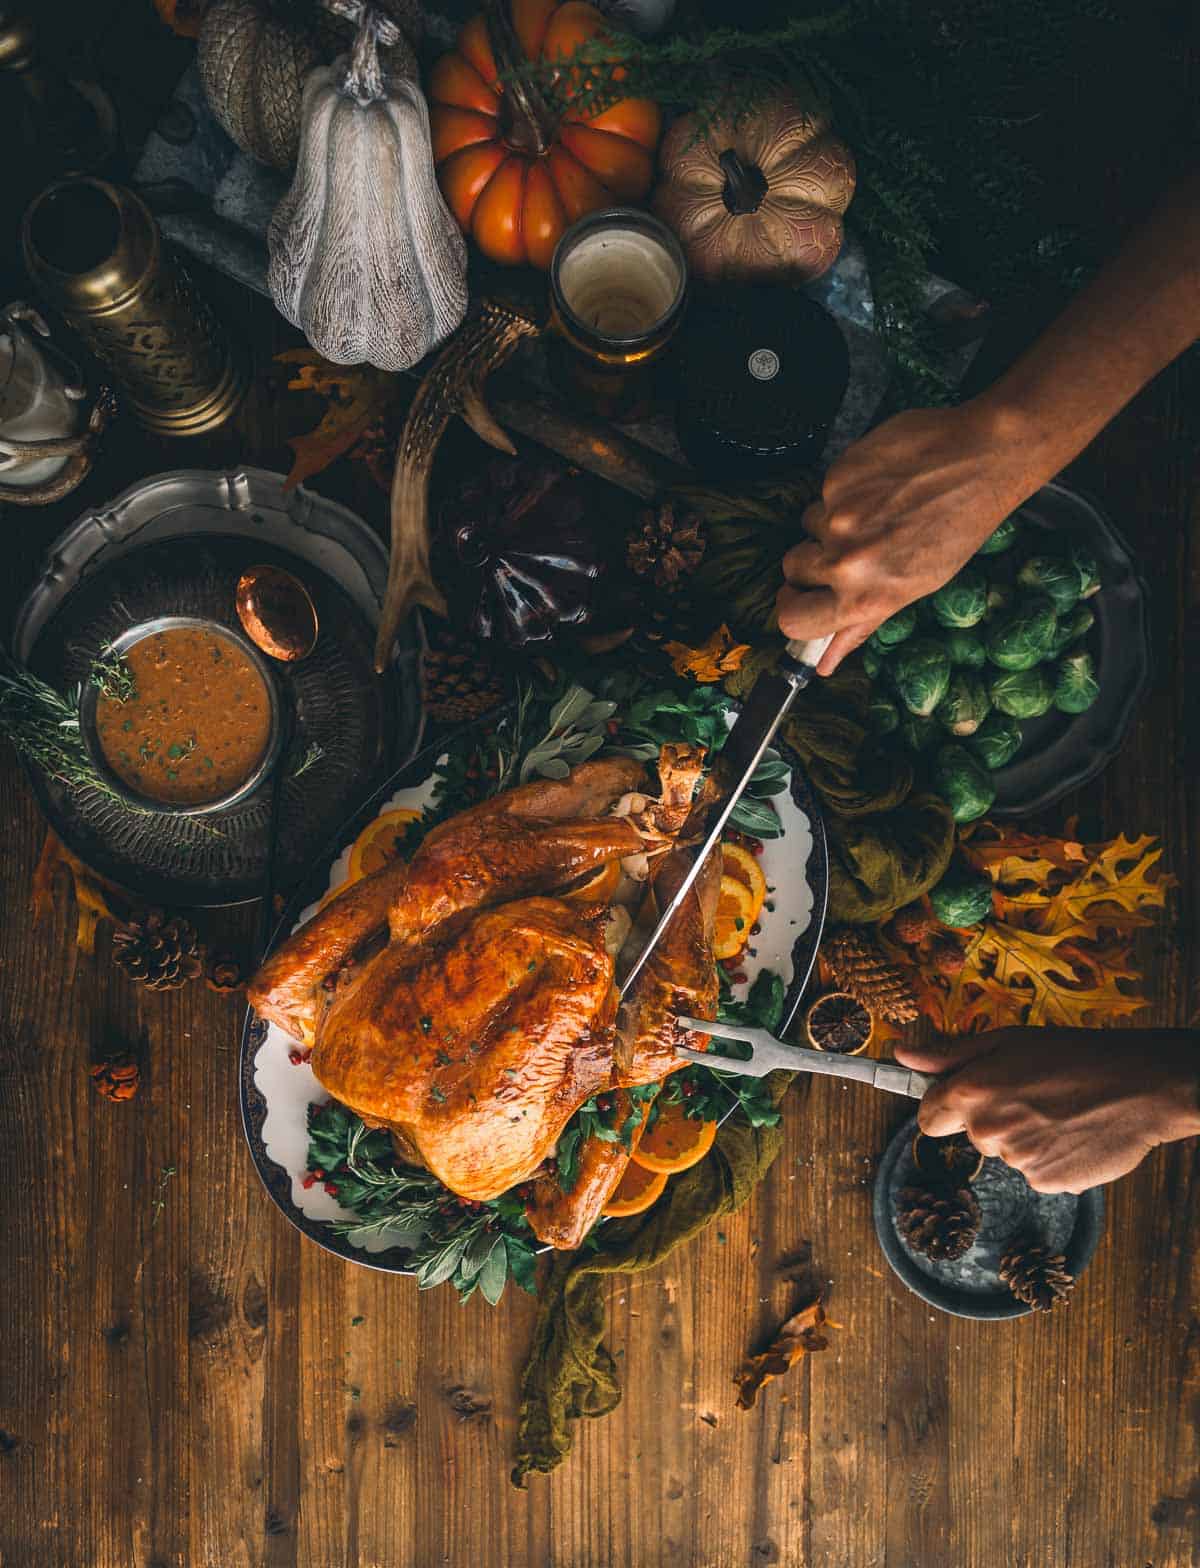 hands carving a turkey by removing the leg from the body with a chef's knife and fork. 